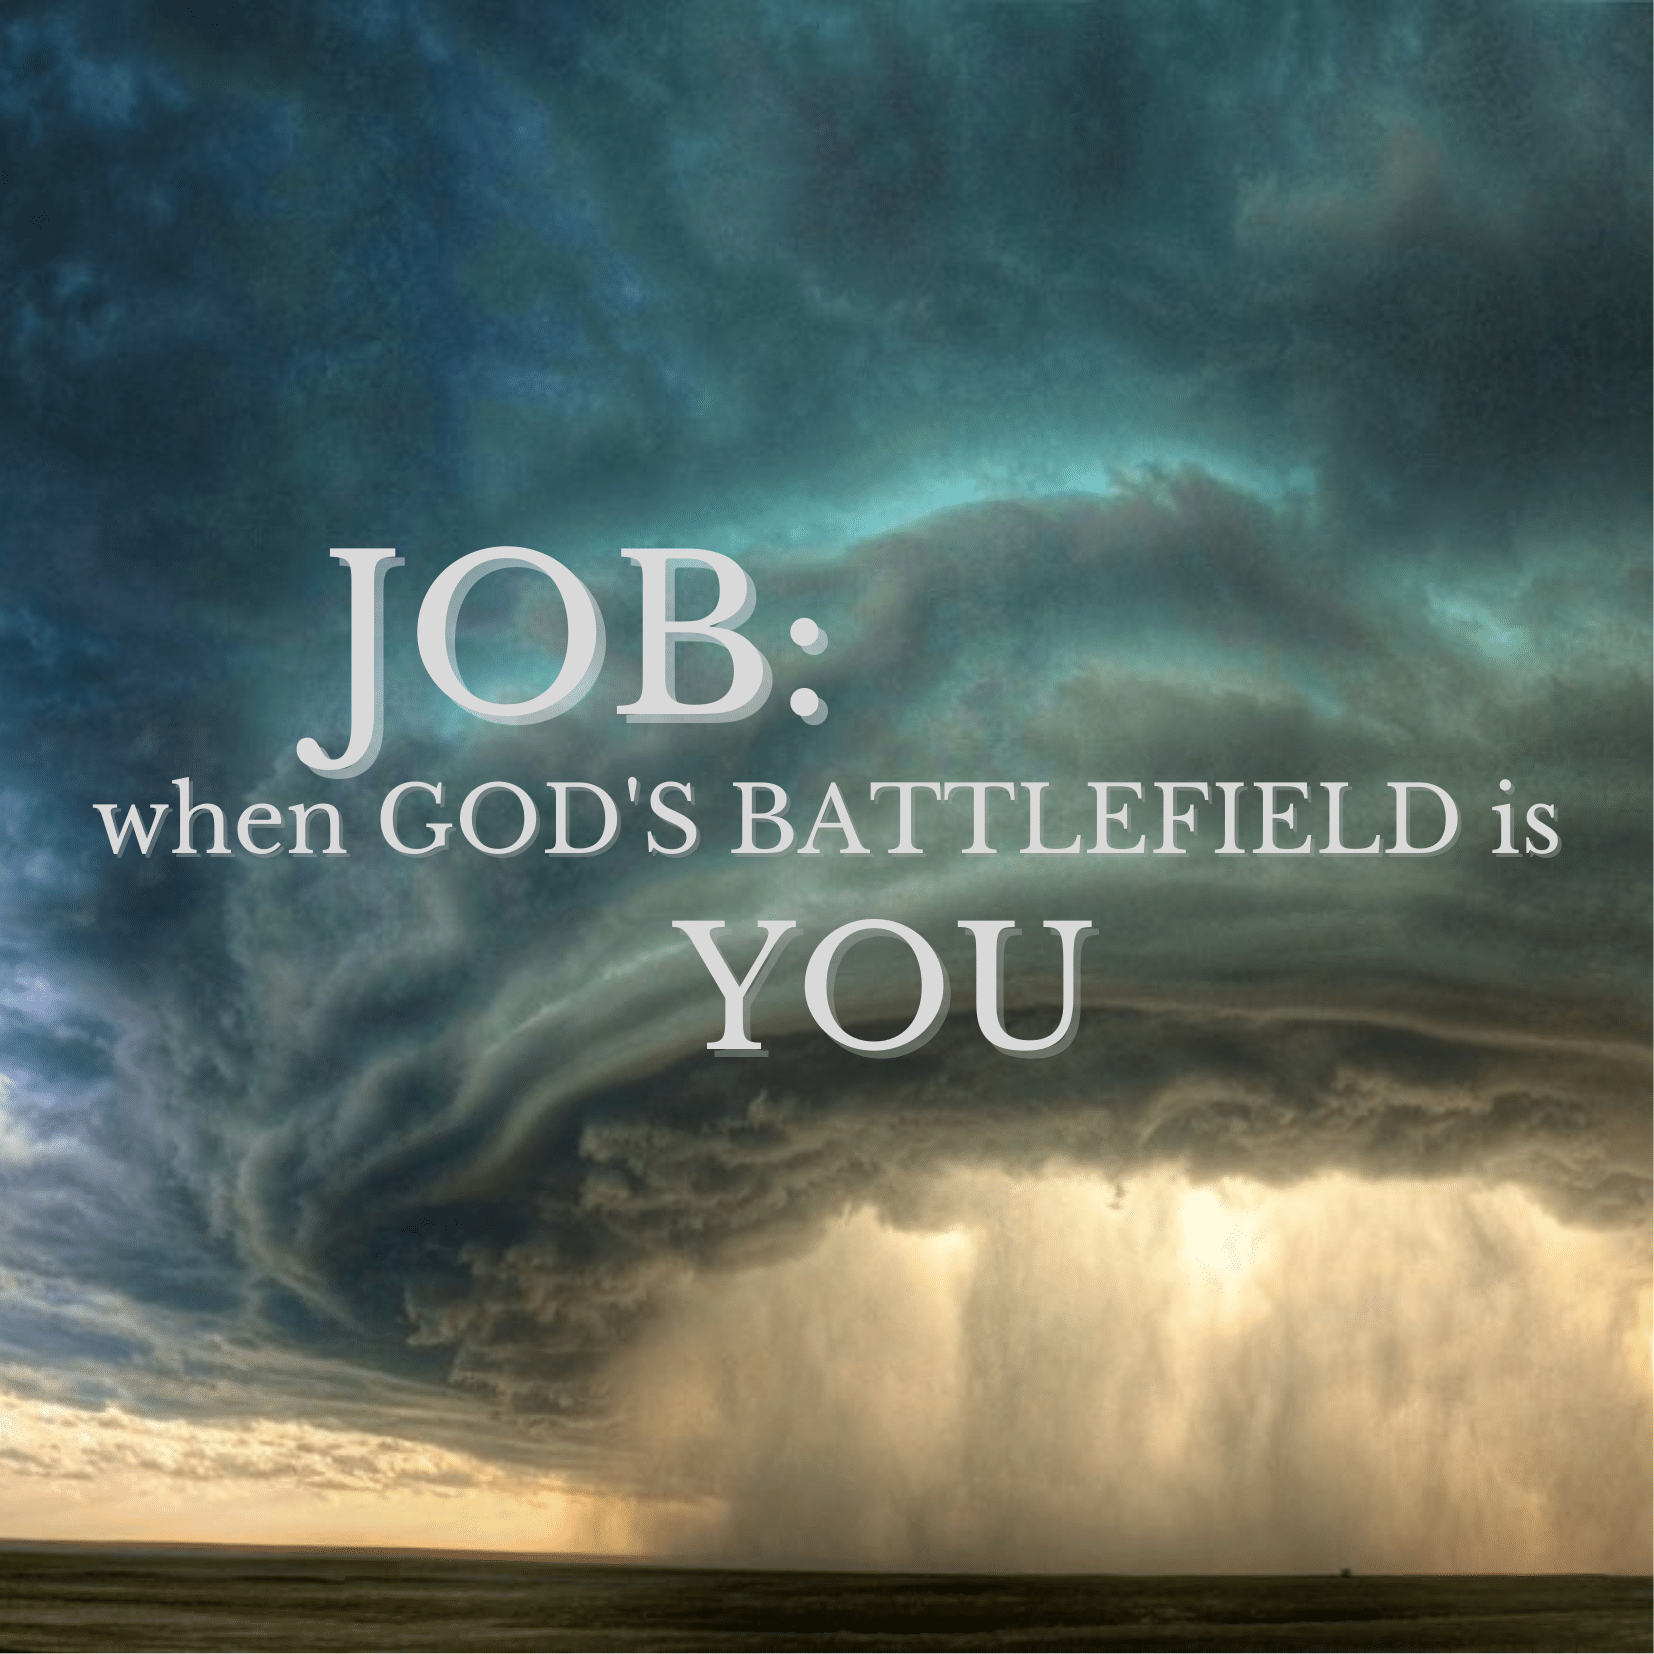 Job’s 3 “Friends”: The Folly of Putting God In A Box